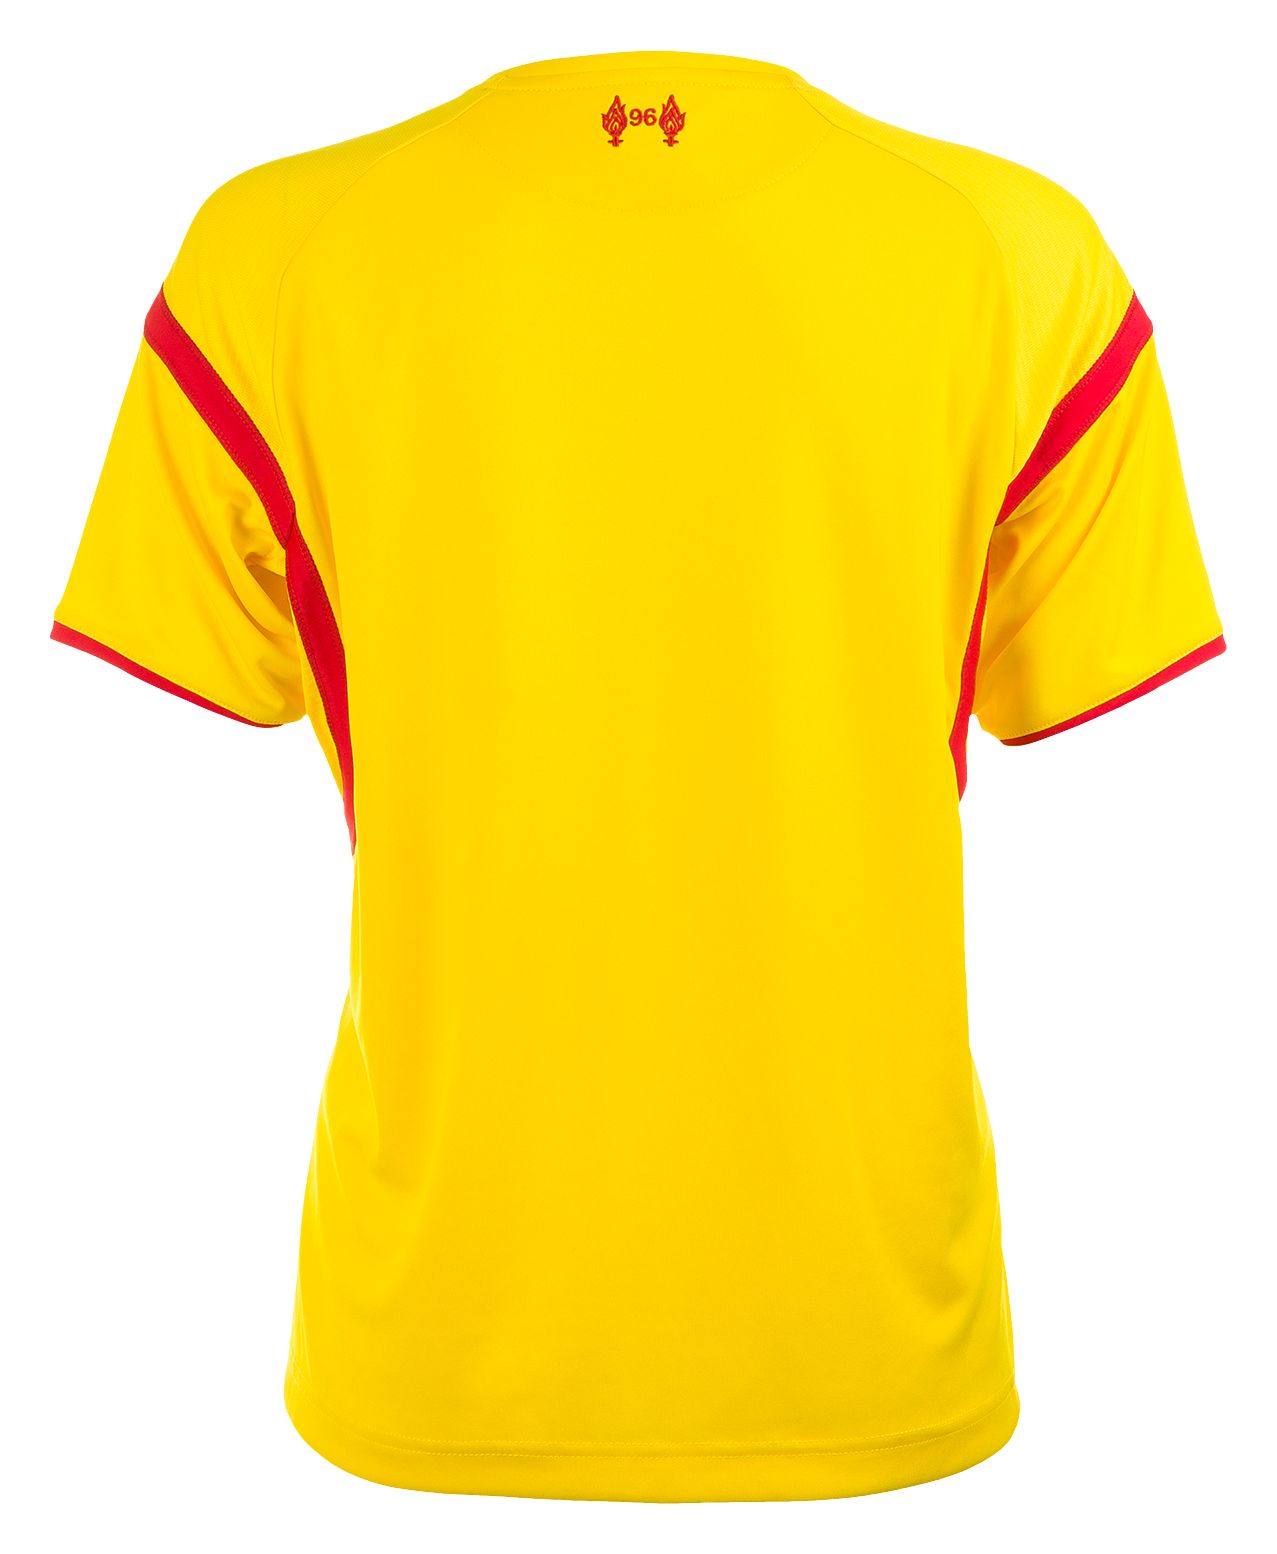 Liverpool Away Ladies Short Sleeve Jersey 2014/15, Cyber Yellow with High Risk Red image number 2